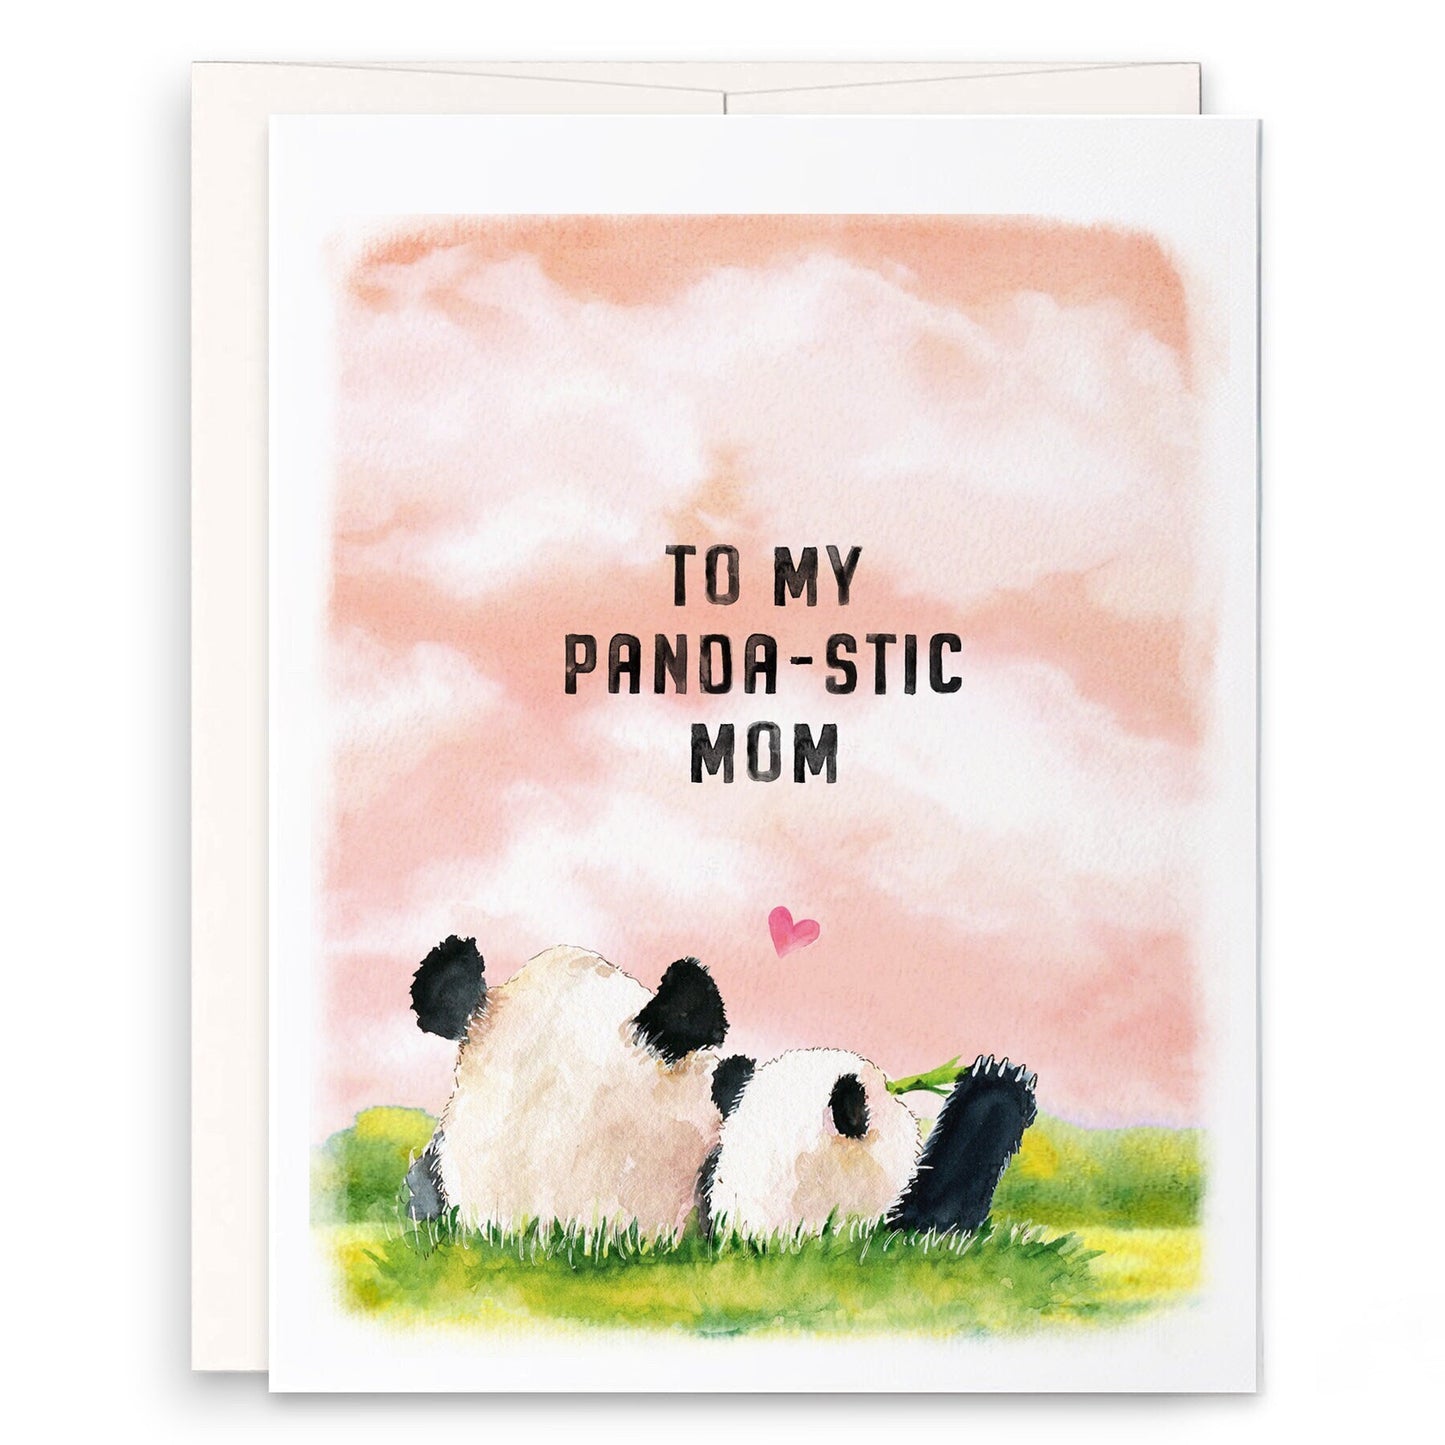 To My Panda-stic Mom Card - Panda Mom And Baby Mother's Day Card Funny - Mom Birthday Card From Daughter - Liyana Studio Greeting Cards